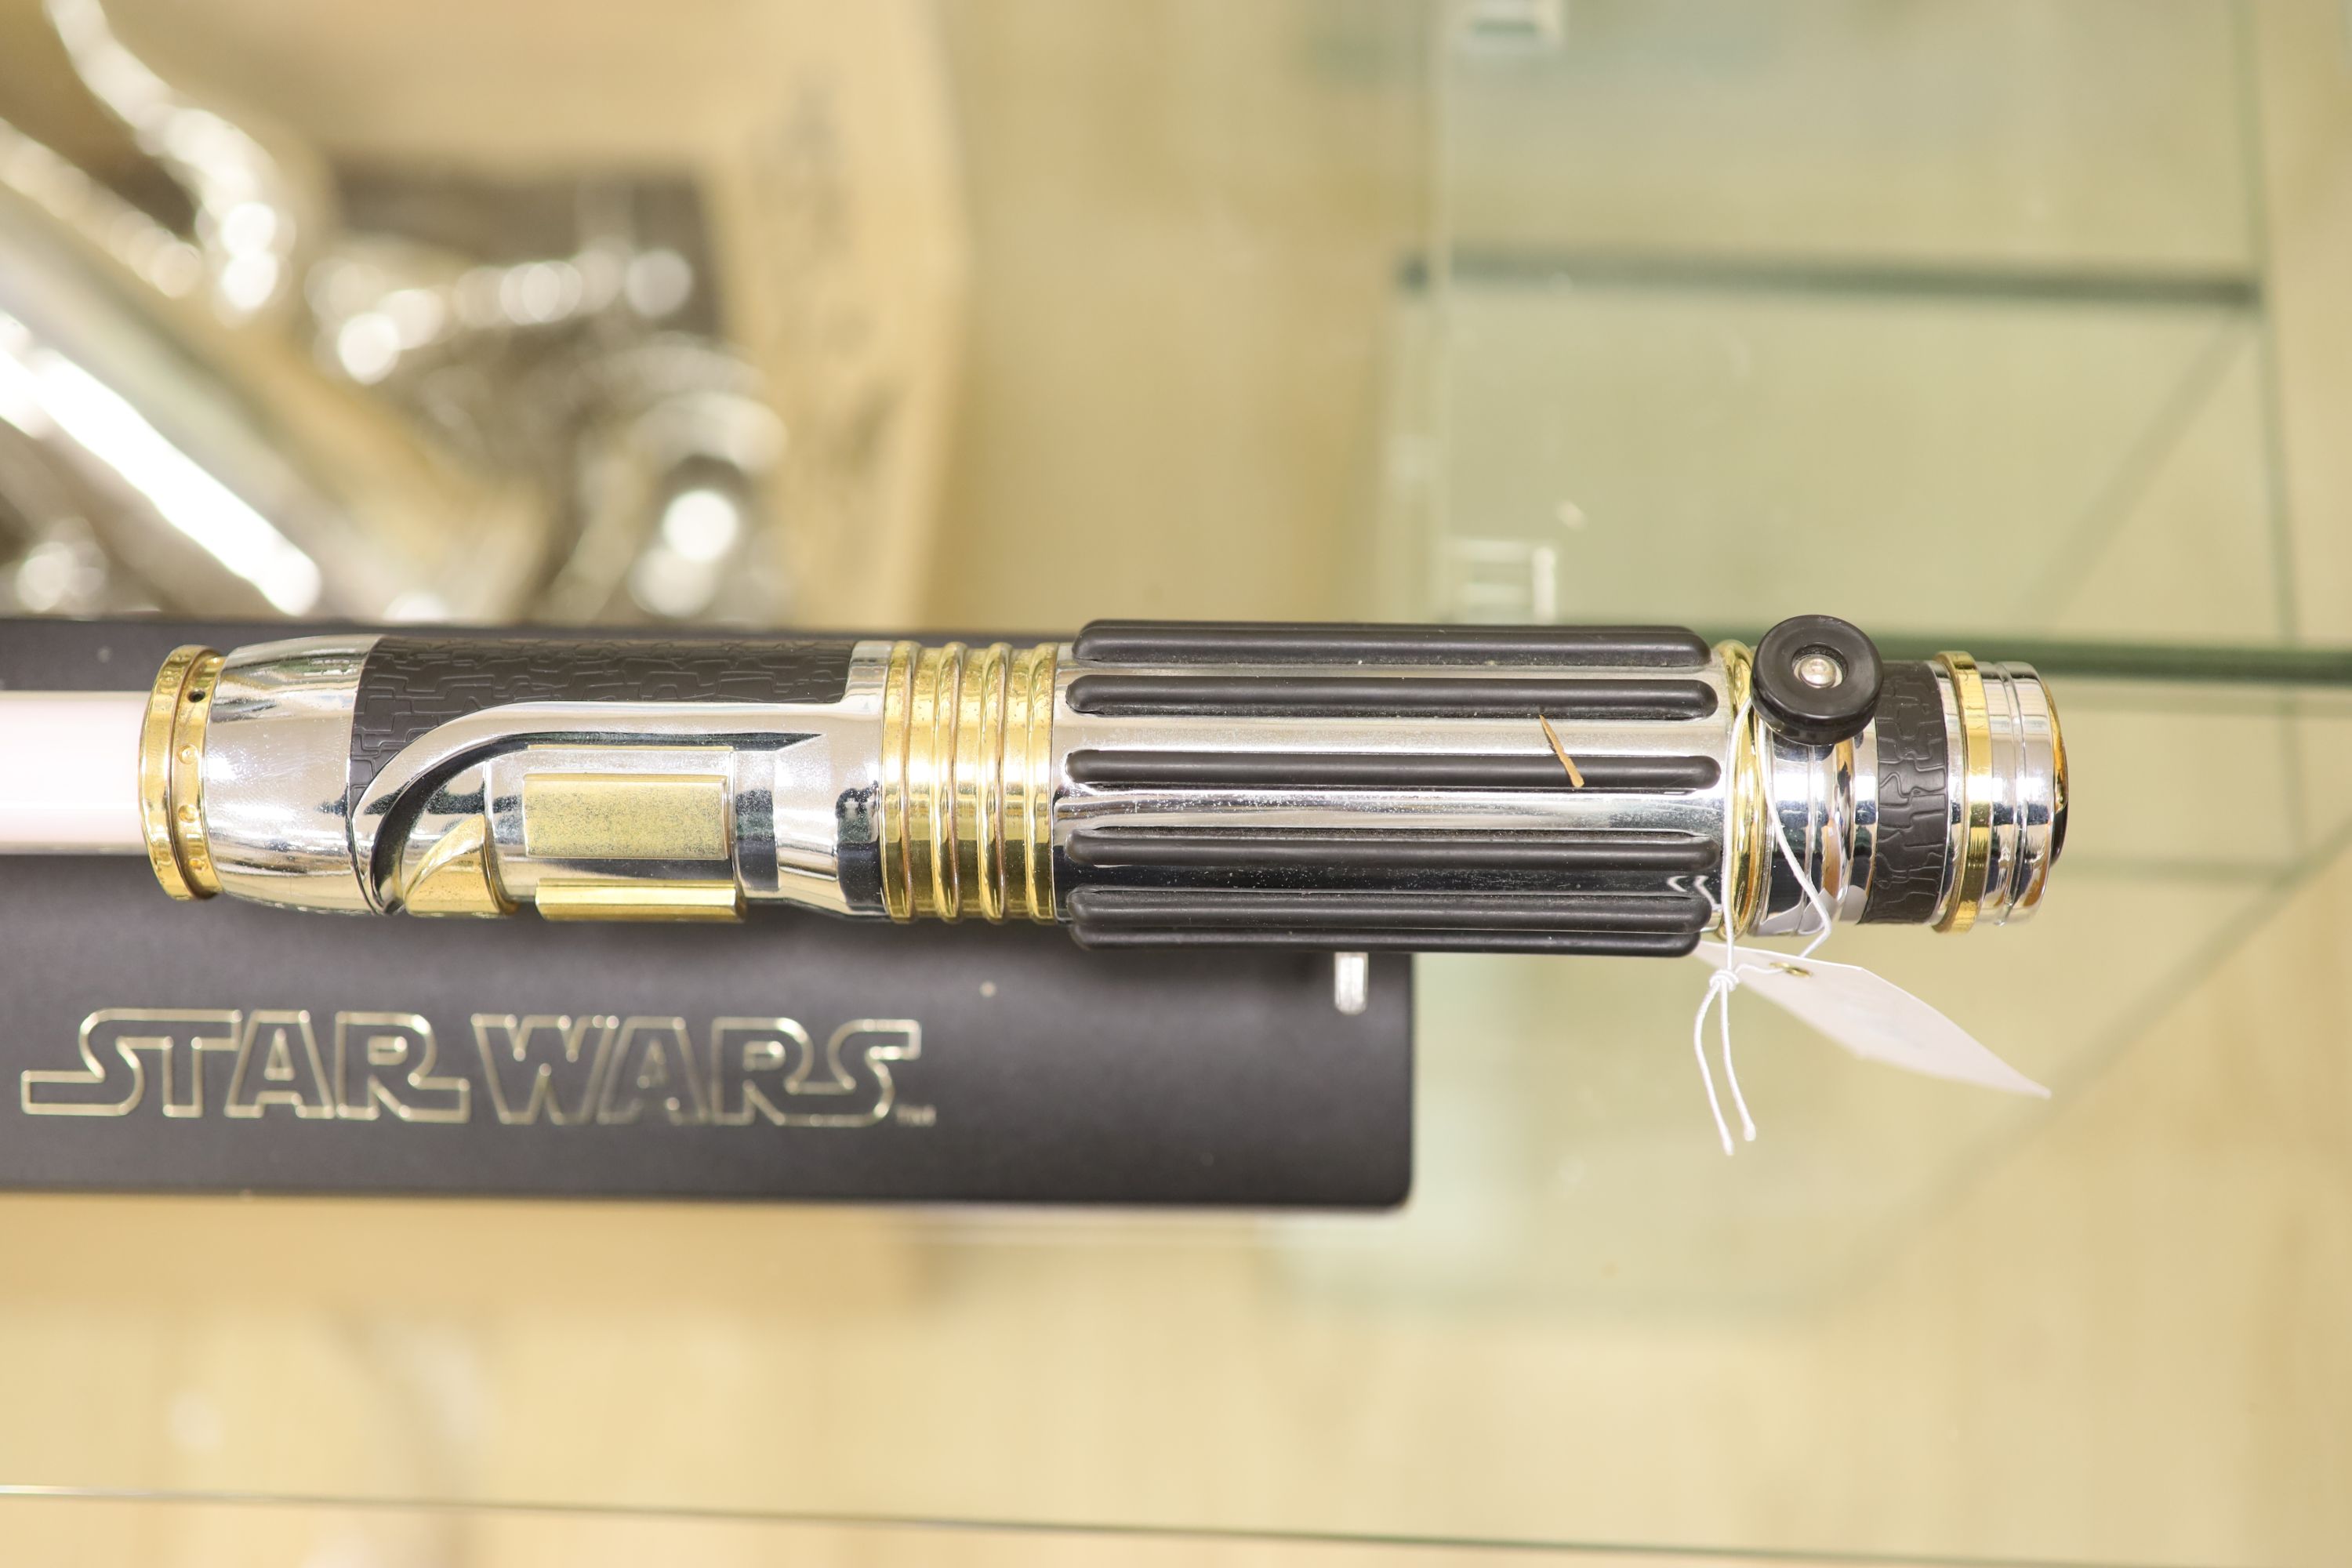 A 2005 Lucasfilm Ltd/Master replicas inc. Star Wars light saber on stand - Image 2 of 3